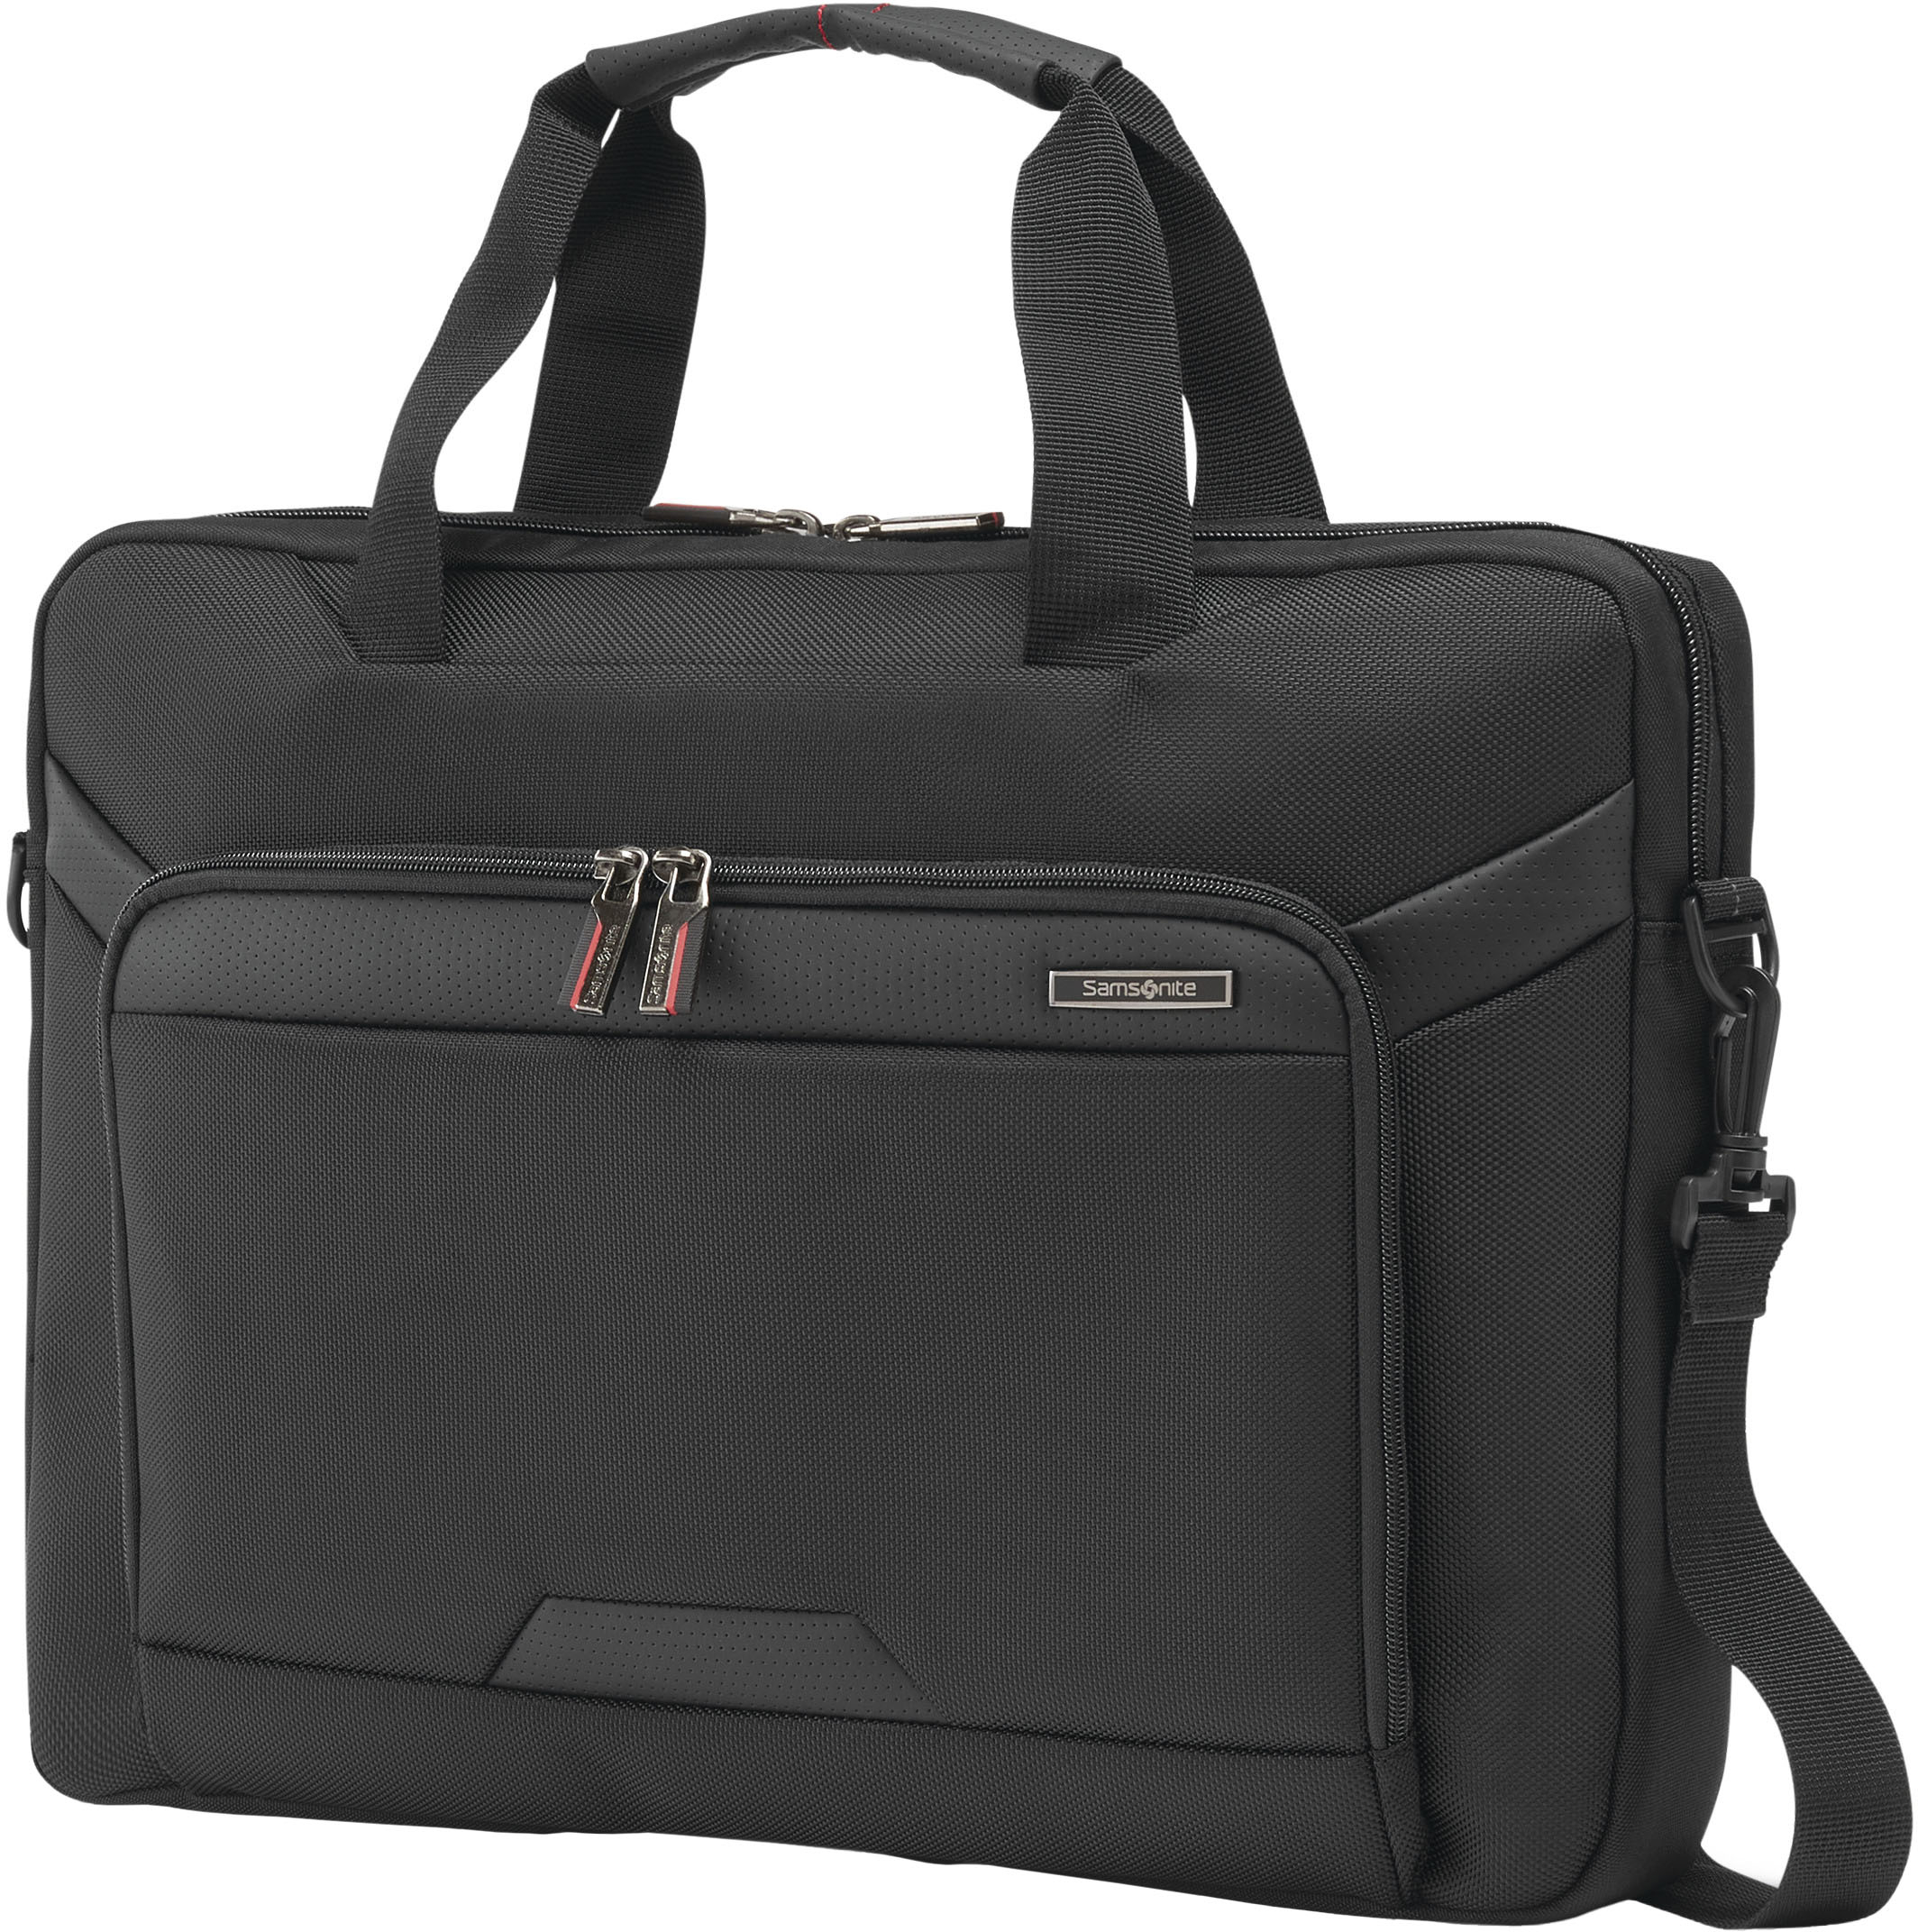 Angle View: Wenger - Case for 14" Laptop - Black